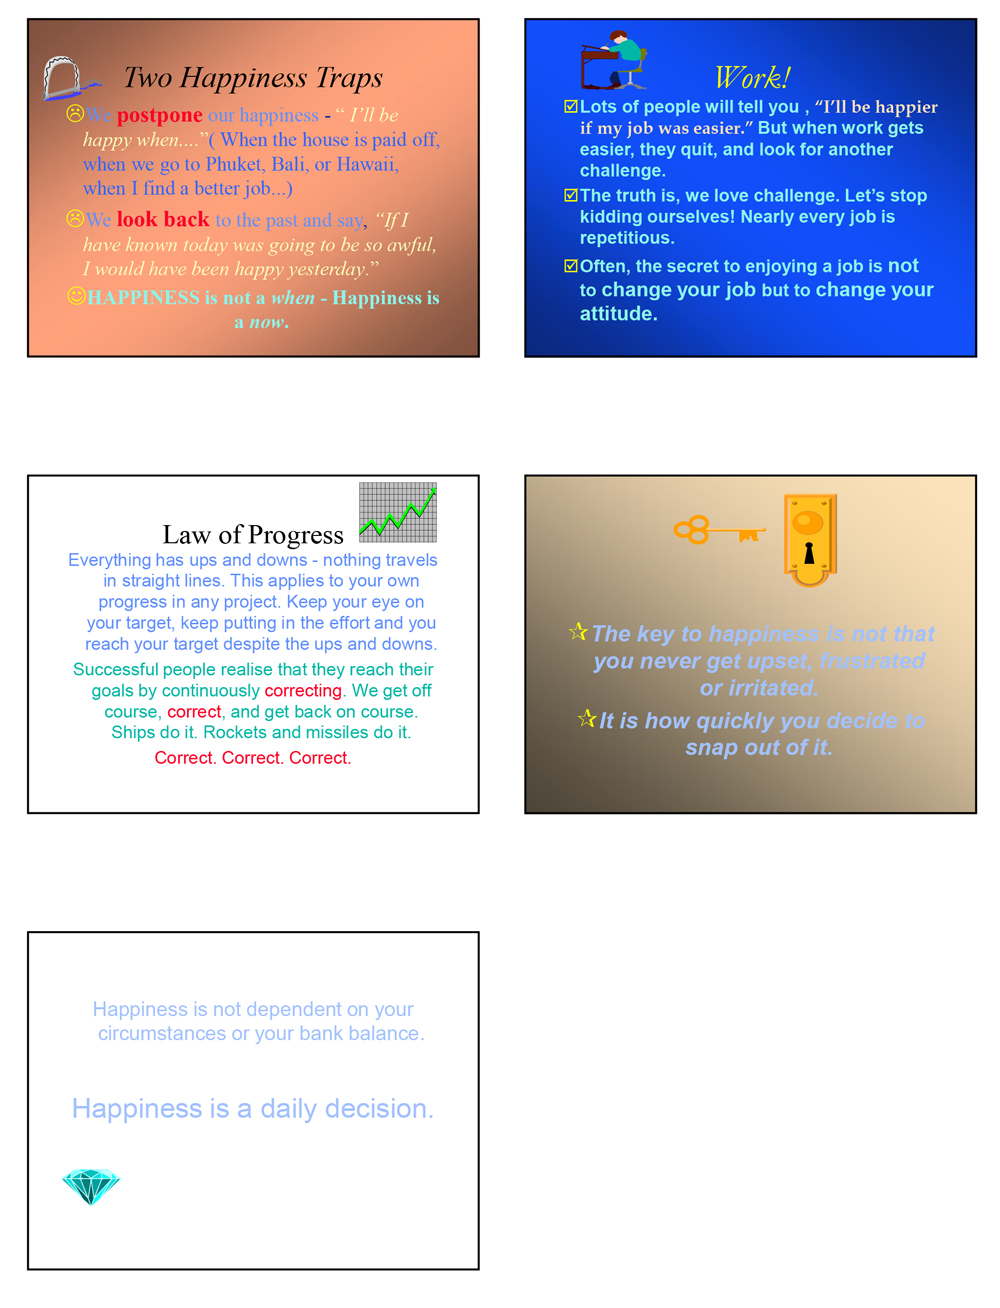 PowerPoint Assignment No 6